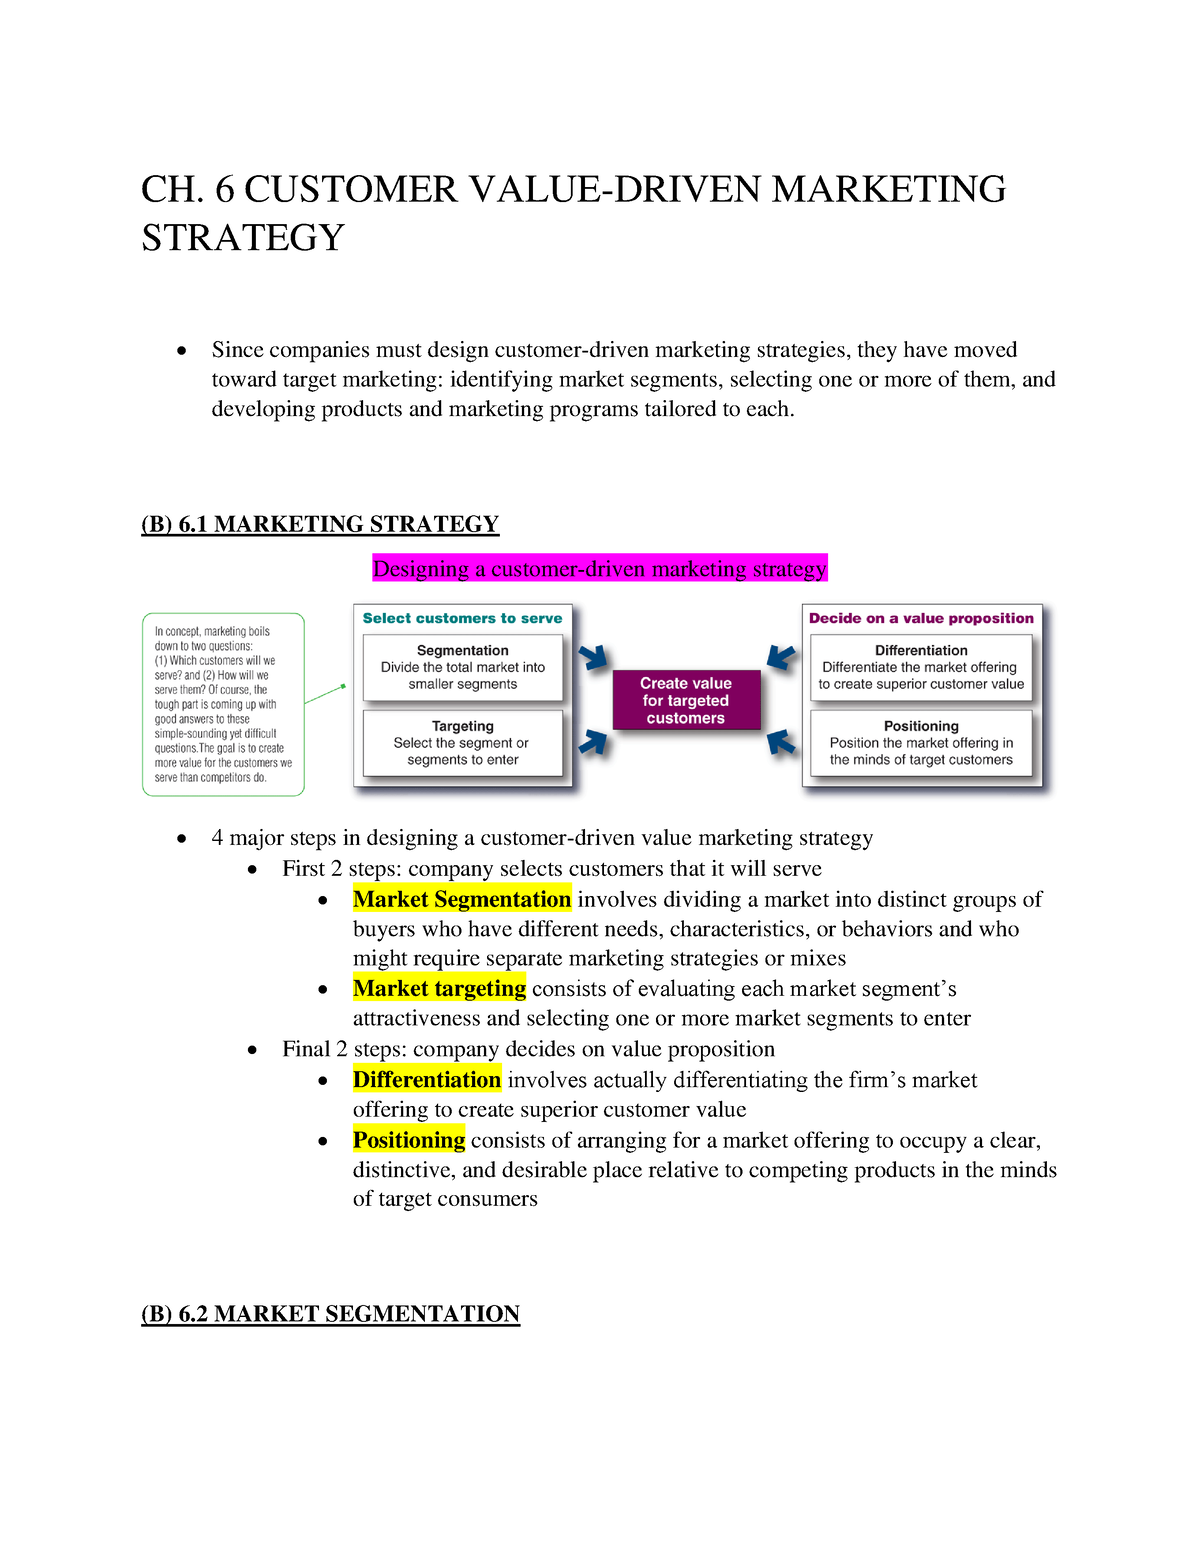 four major steps in designing a customer driven marketing strategy